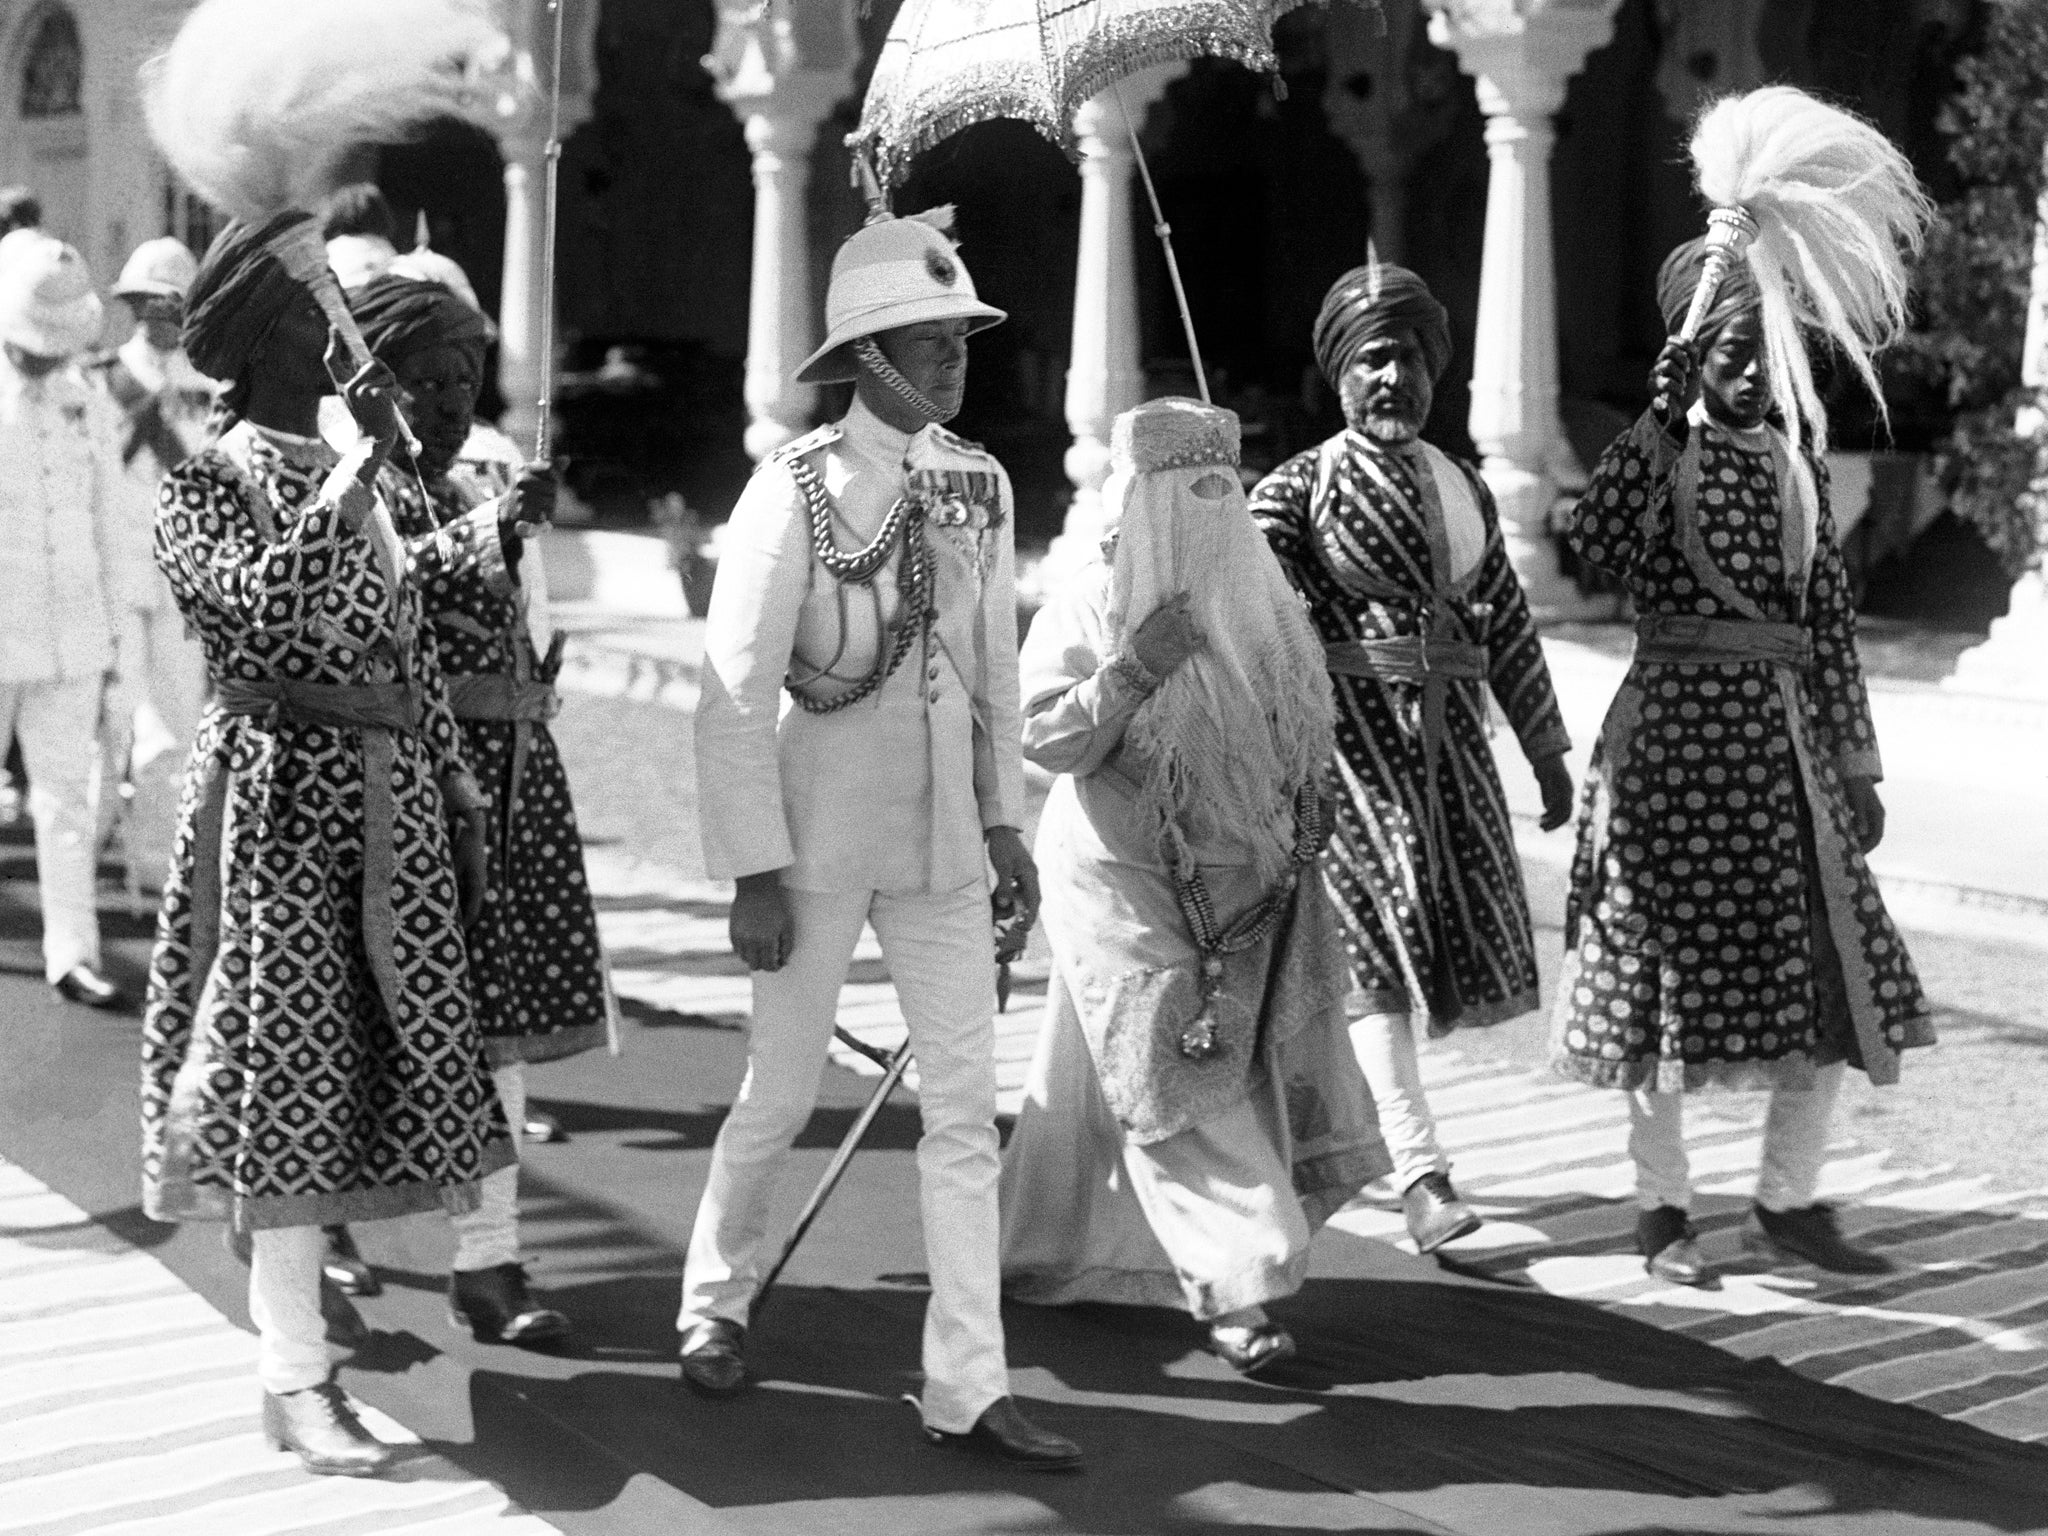 The Prince of Wales and her Highness the begum of Bhopal walk to the Durbar hall at the Sadar Manzil palace in Bhodar